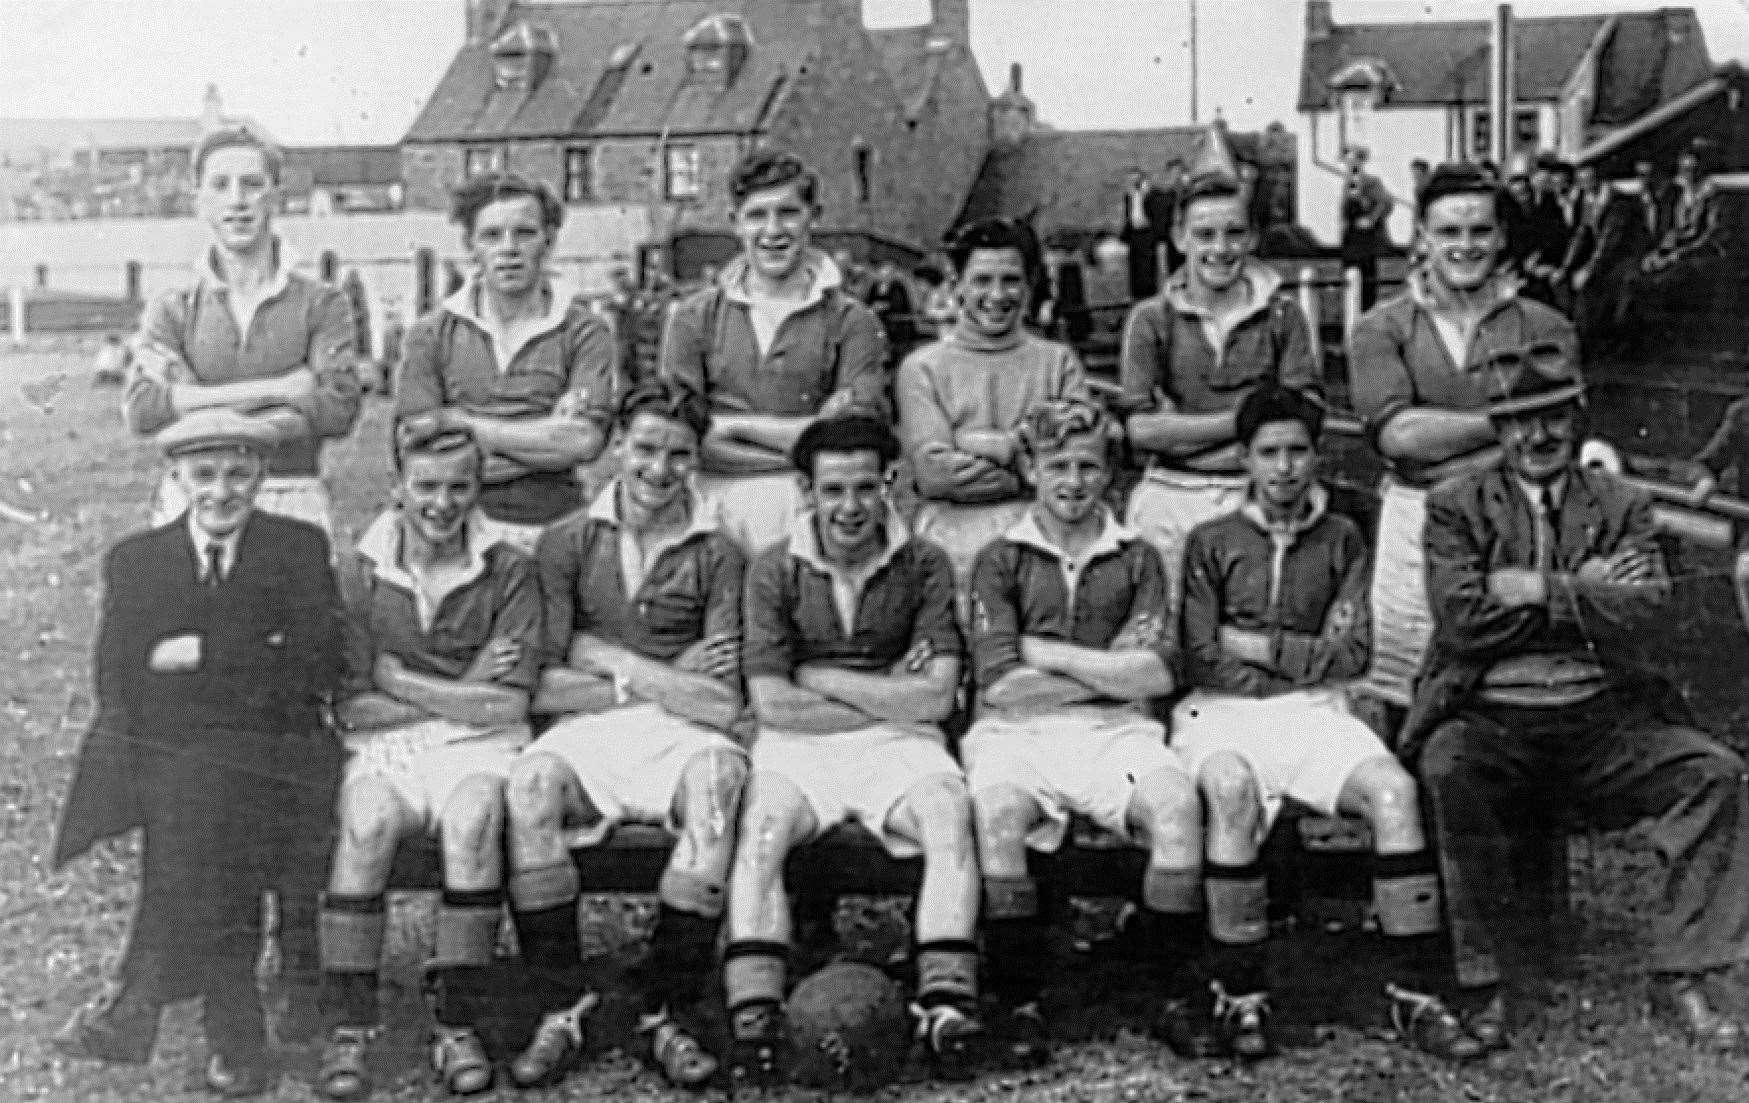 A Caithness amateur football select, consisting mainly of Wick players, took on junior team Clachnacuddin Rangers at Grant Street, Inverness, probably in 1952.